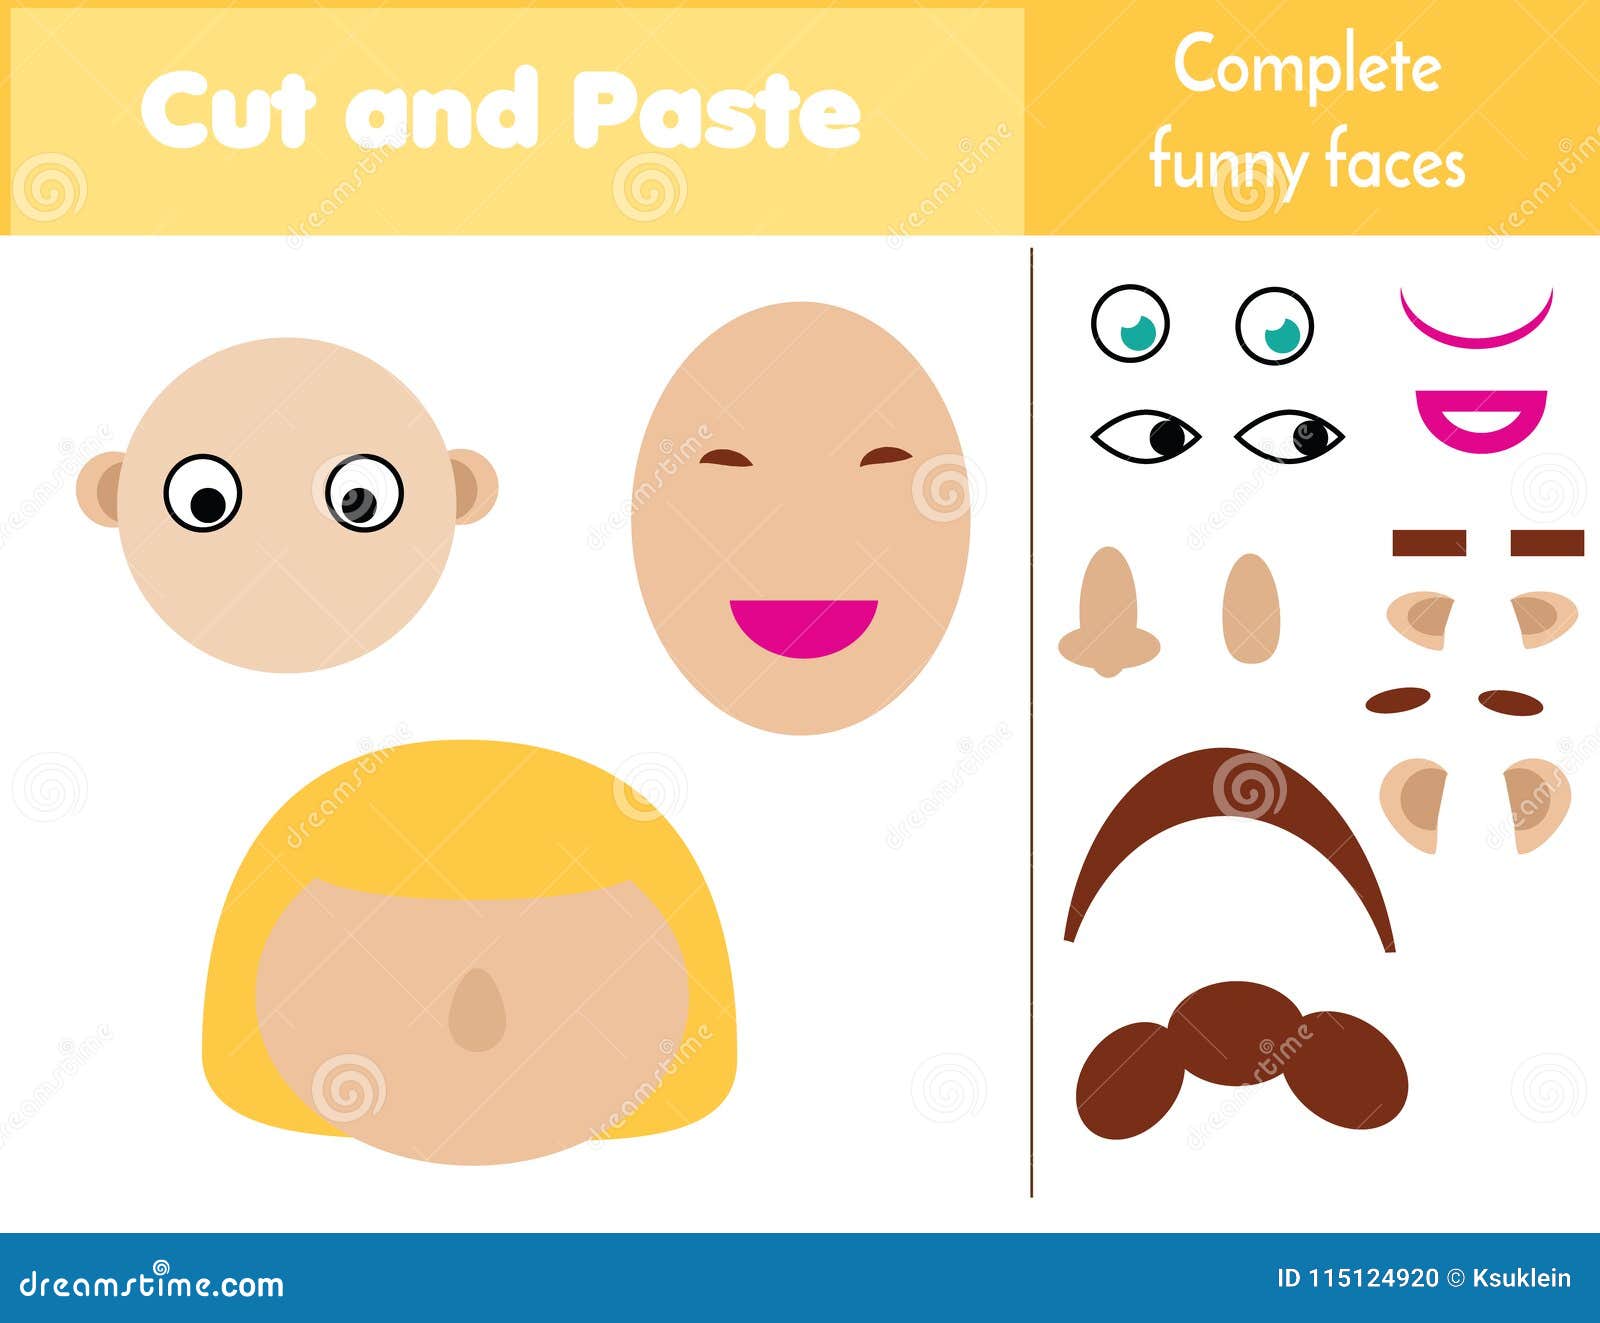 https://thumbs.dreamstime.com/z/cut-paste-children-educational-game-paper-cutting-activity-complete-funny-faces-glue-scissors-stickers-toddlers-to-115124920.jpg